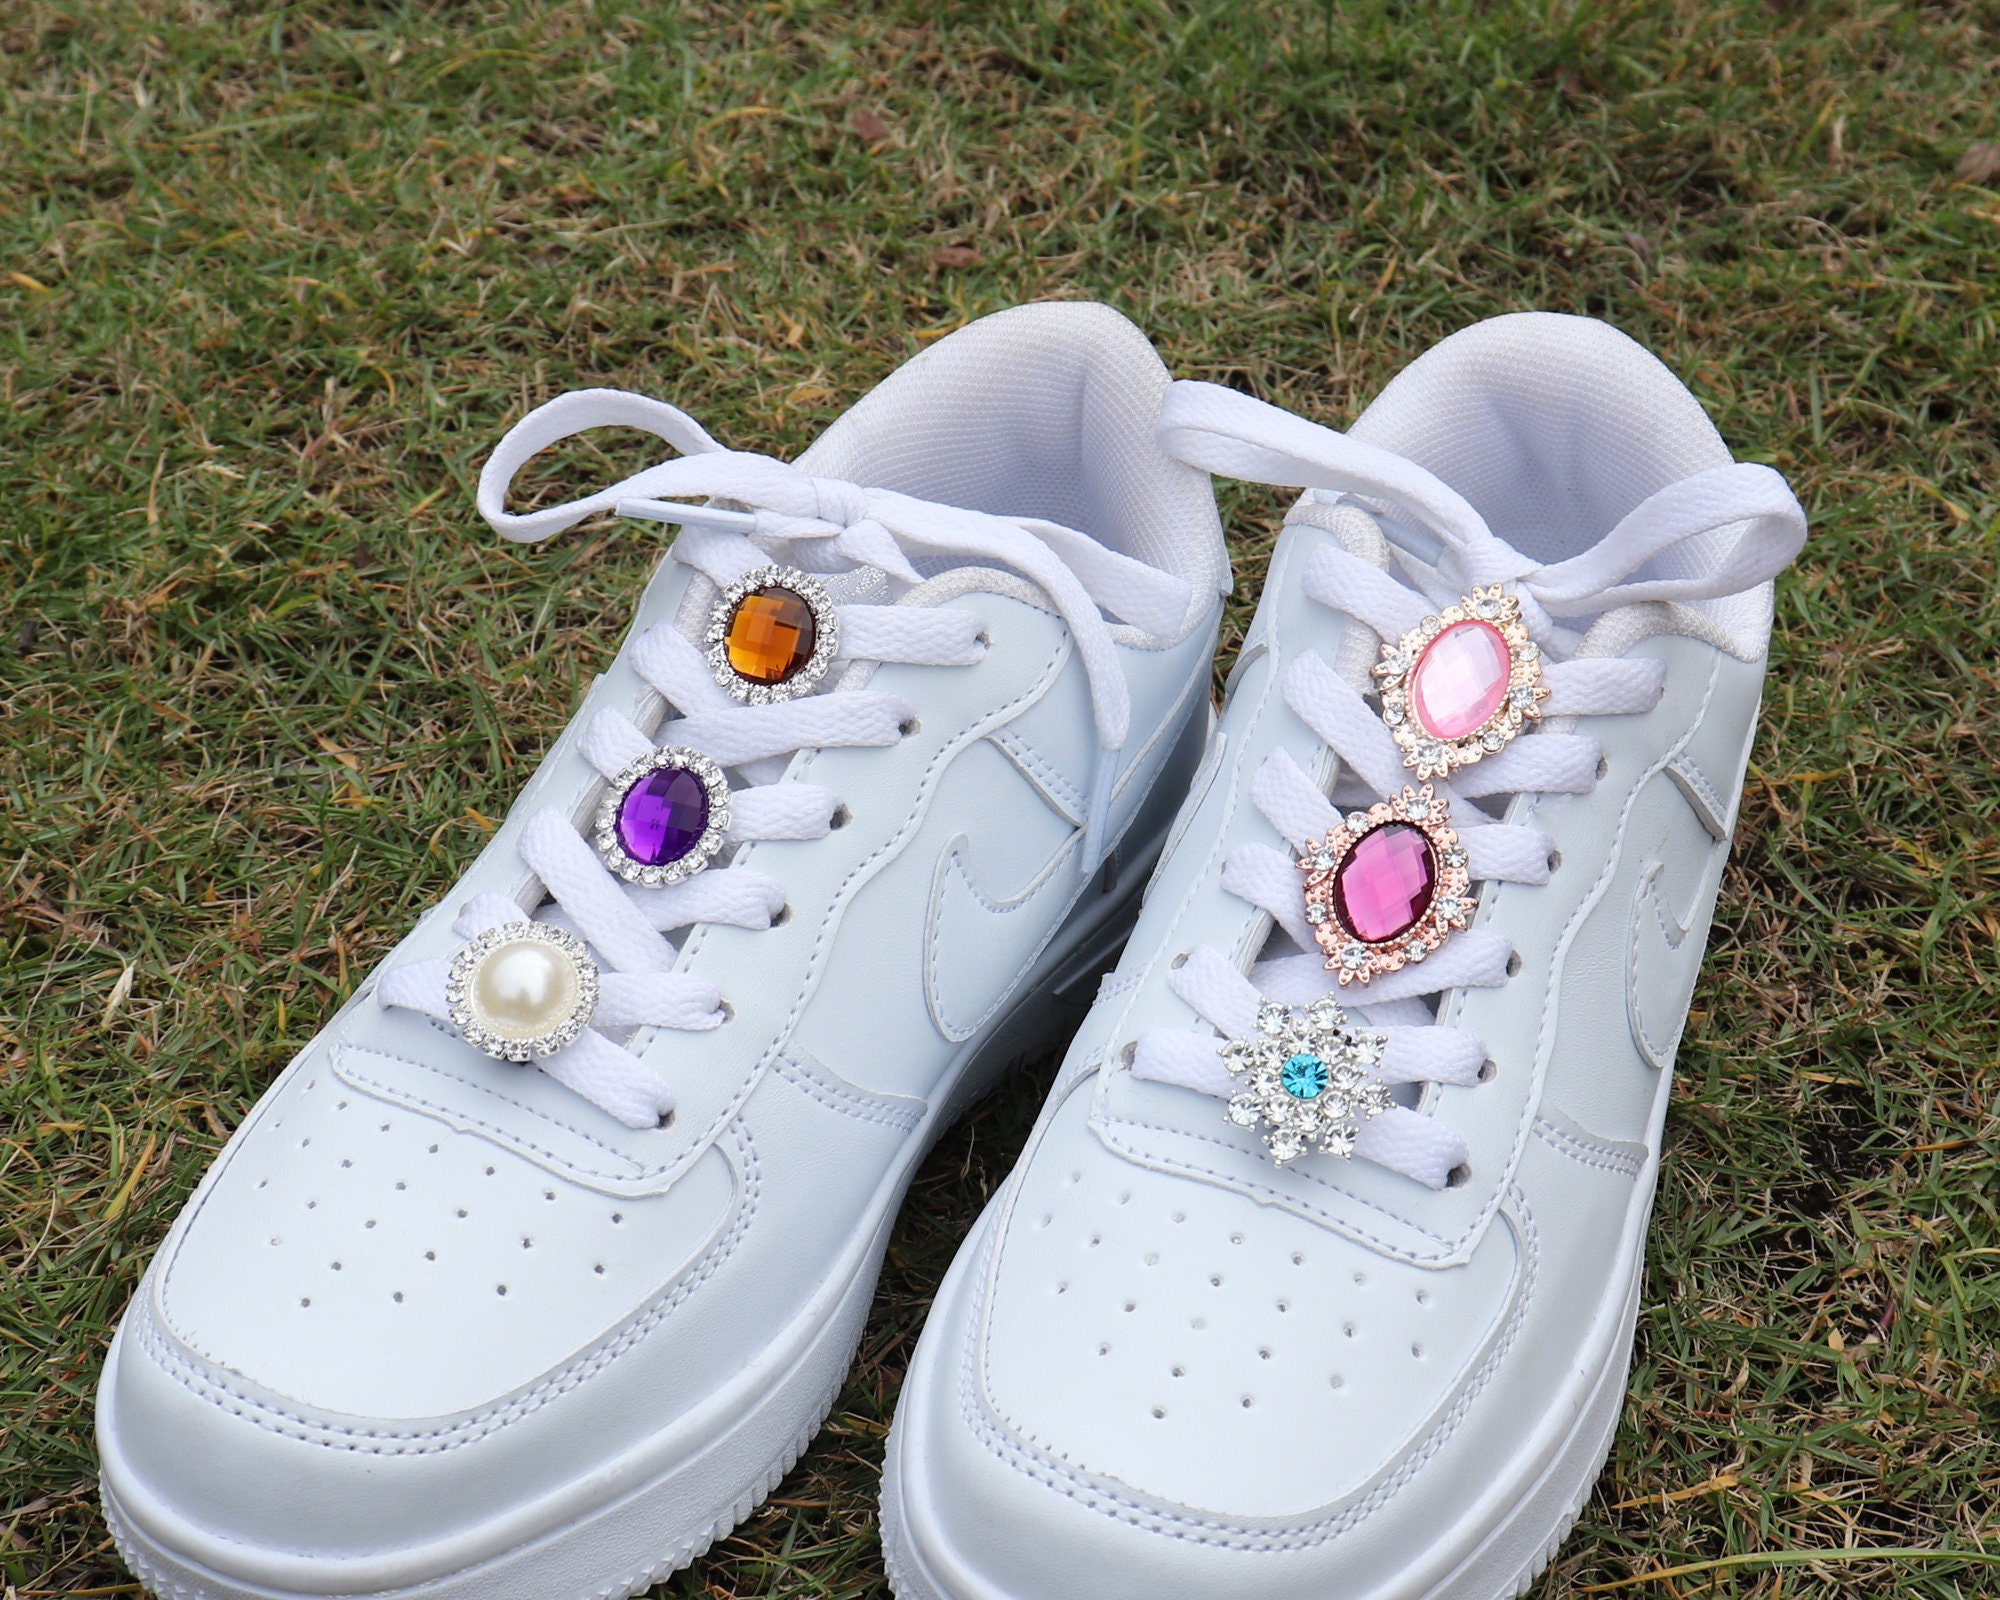 1pc Luxury Rhinestone Jewelry, Jewels Shoe Laces Charms DIY Women Sneakers Laces Buckle Decorations Shoes Accessories Metal Decor Shoelaces Clips